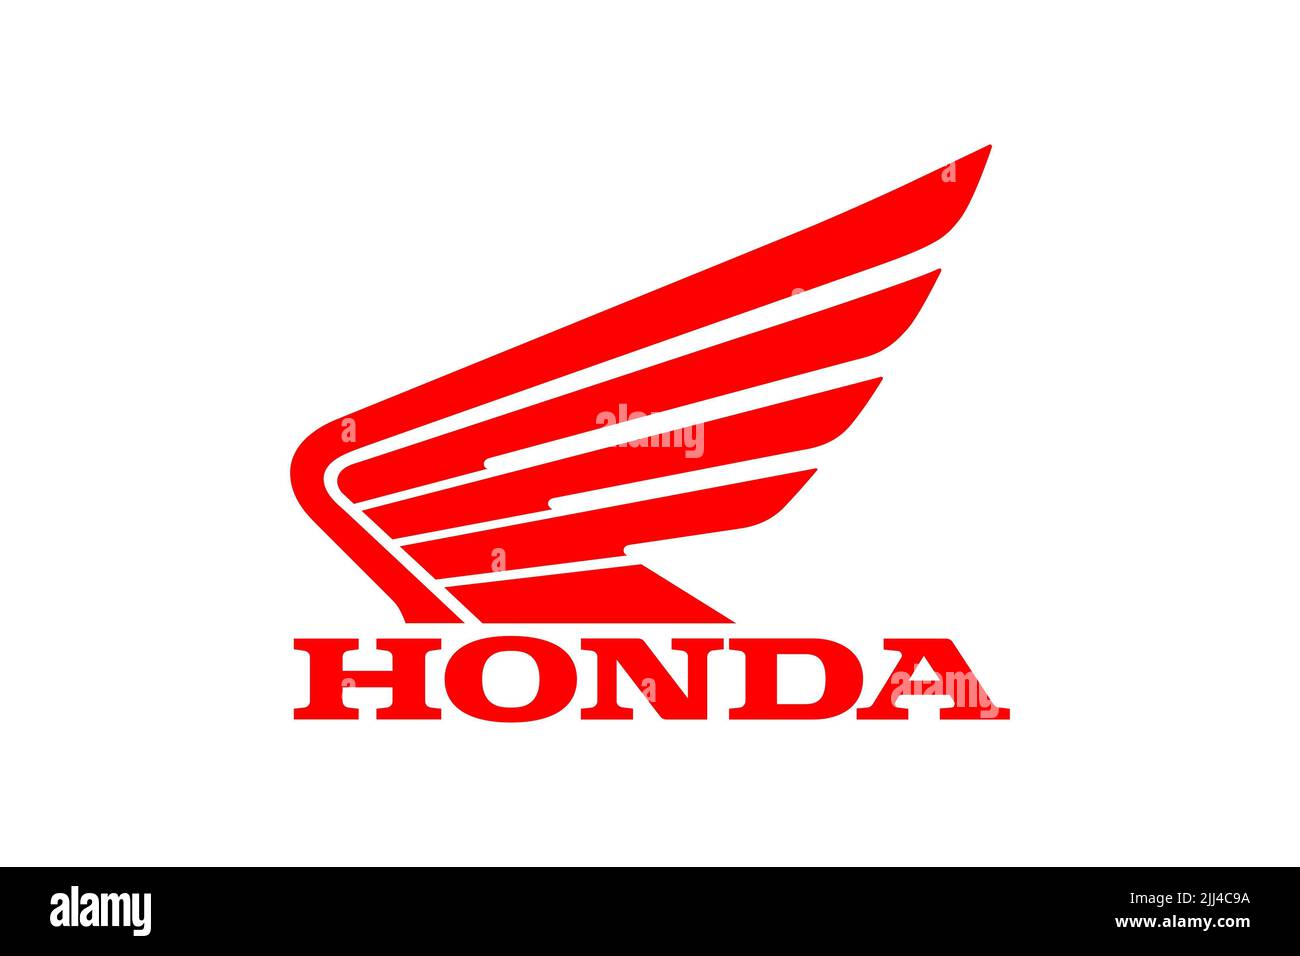 Honda Motorcycle and Scooter India, Logo, Weisser Hintergrund Stock Photo